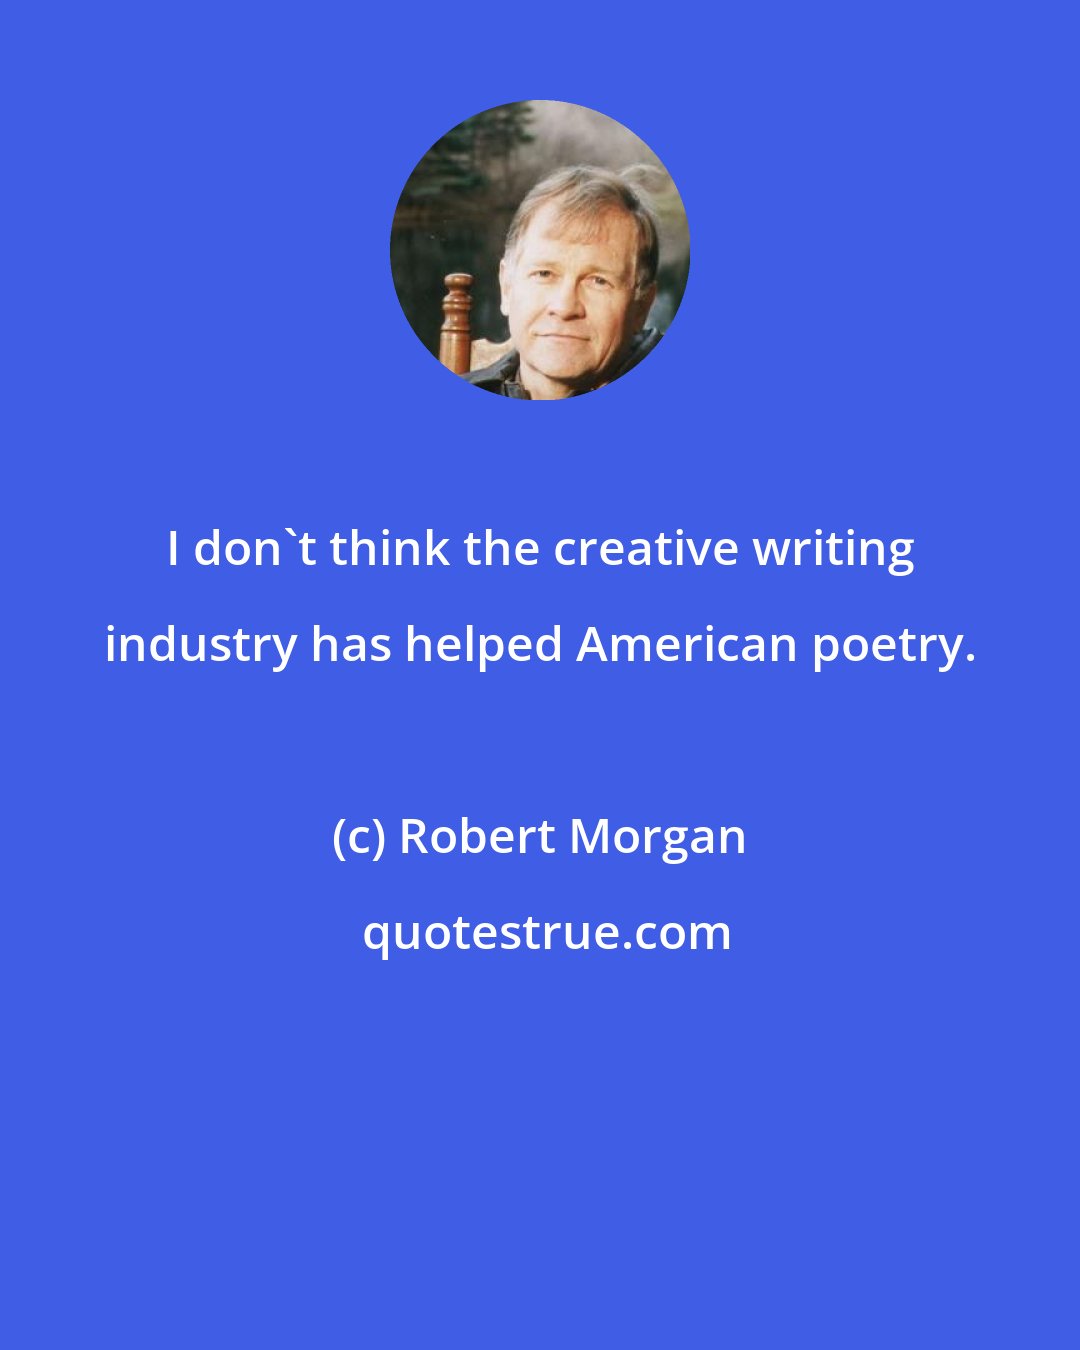 Robert Morgan: I don't think the creative writing industry has helped American poetry.